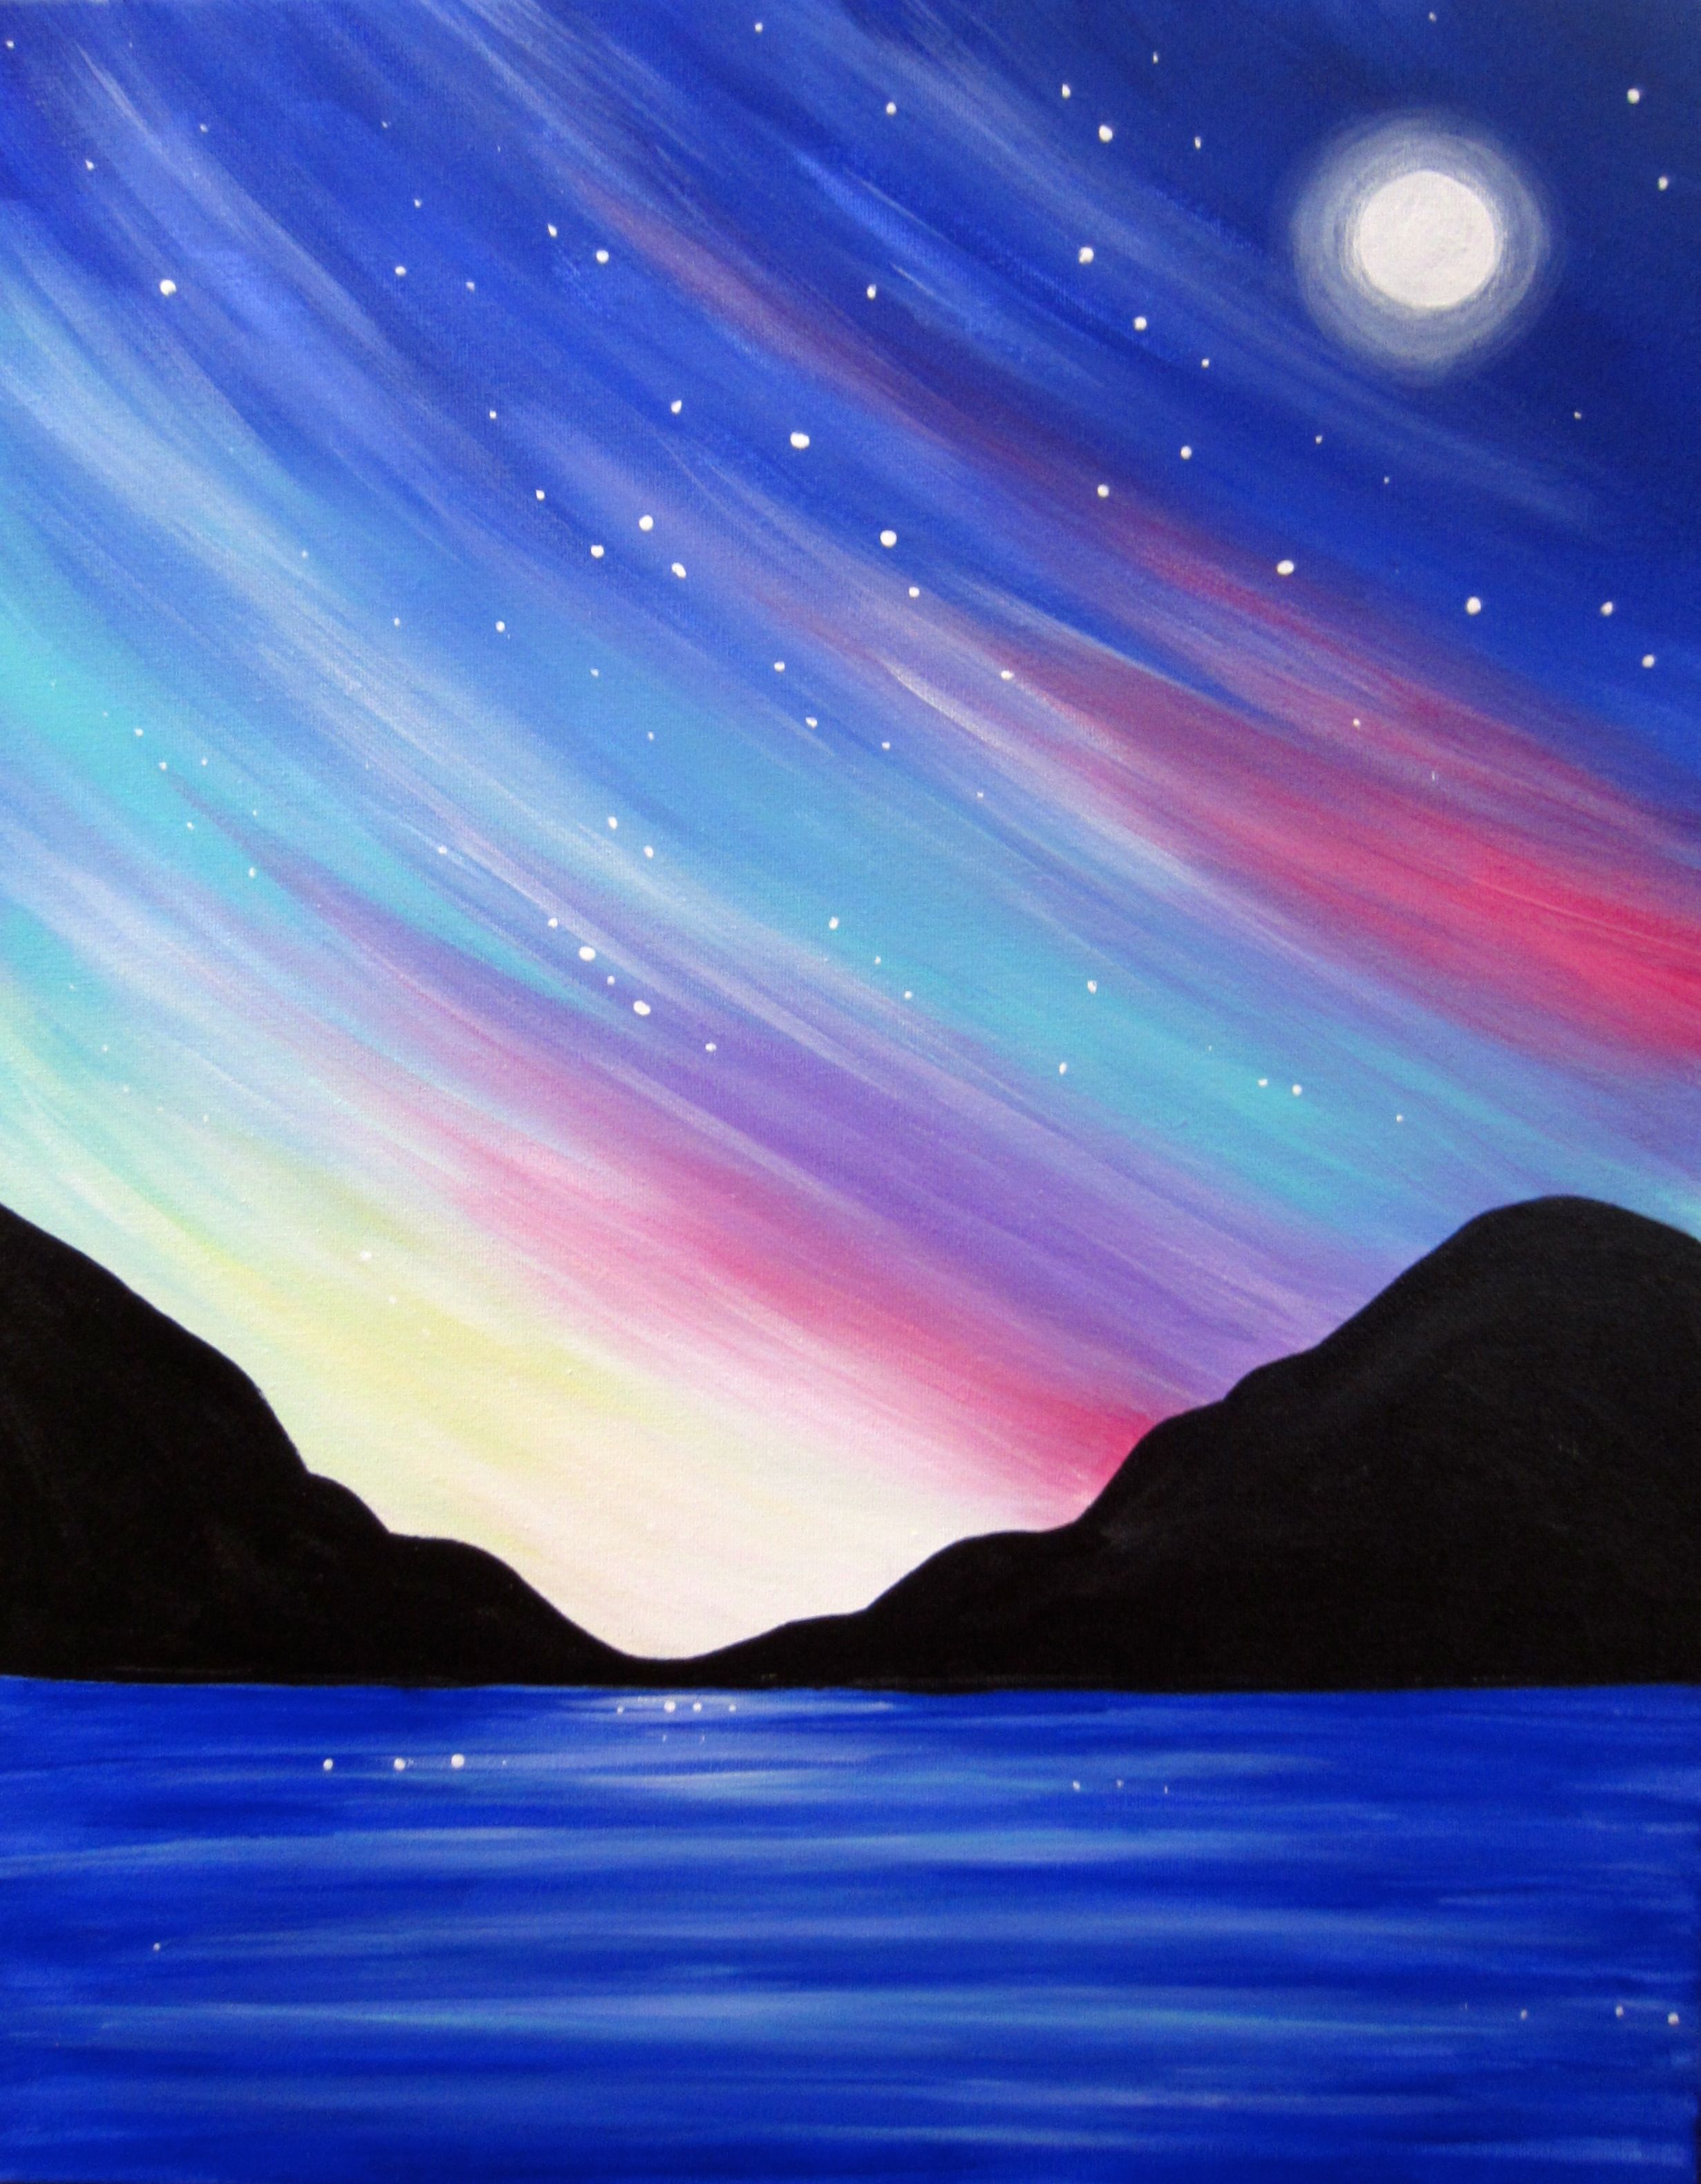 Cant wait to paint this Celestial Seascape with Lori next month!